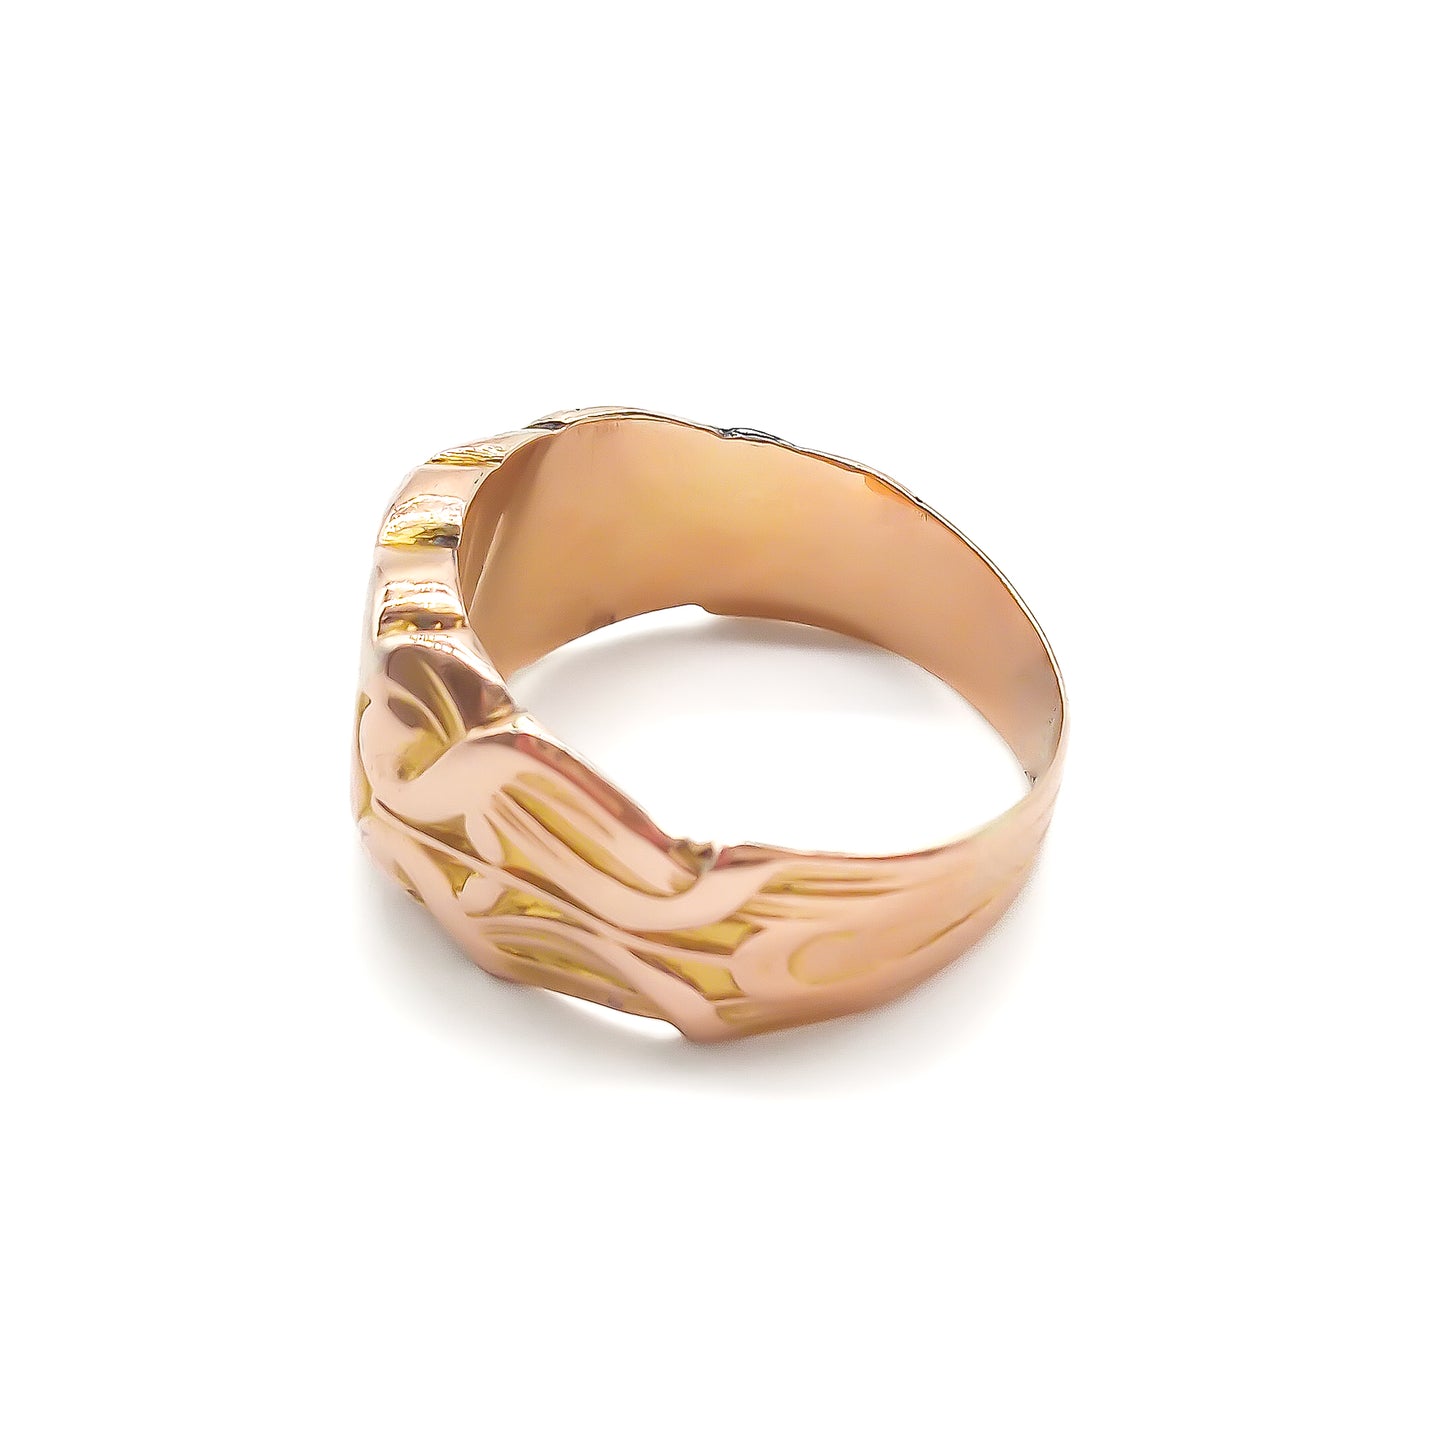 Magnificent 14ct rose gold signet ring with fancy script letters on a crest and beautiful art nouveau detail on the shank. 